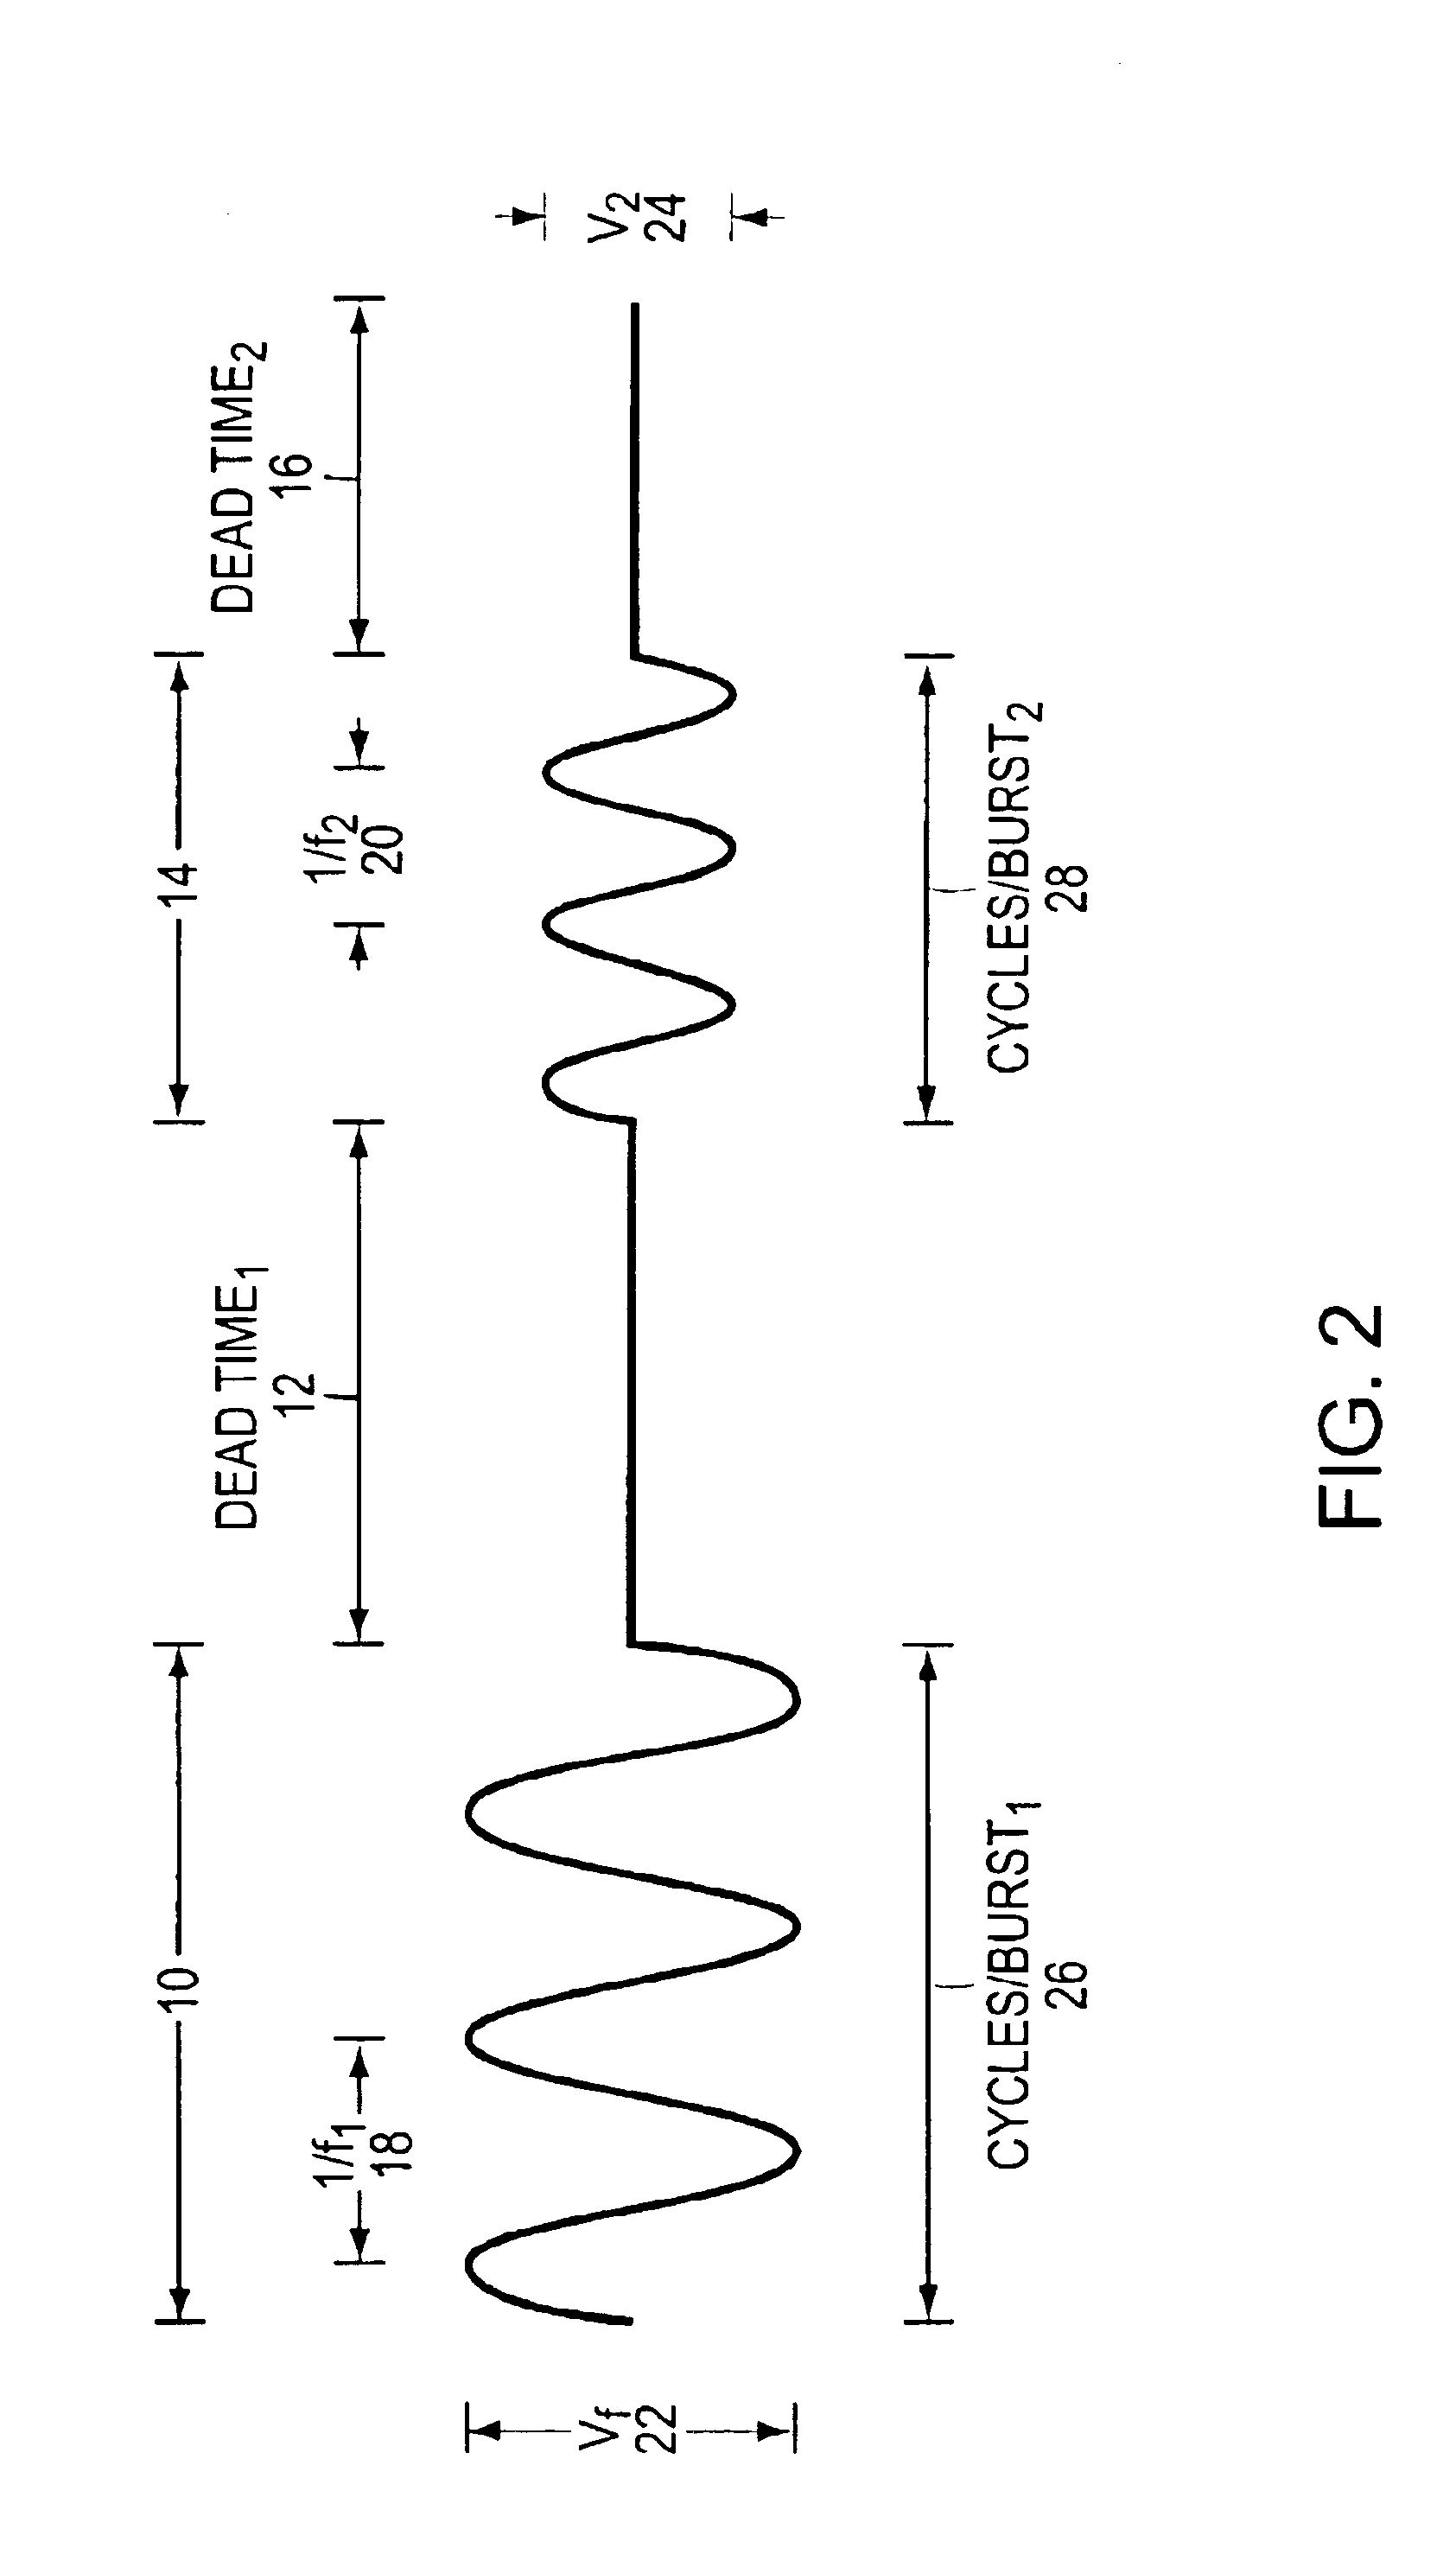 Method and apparatus for acoustically controlling liquid solutions in microfluidic devices